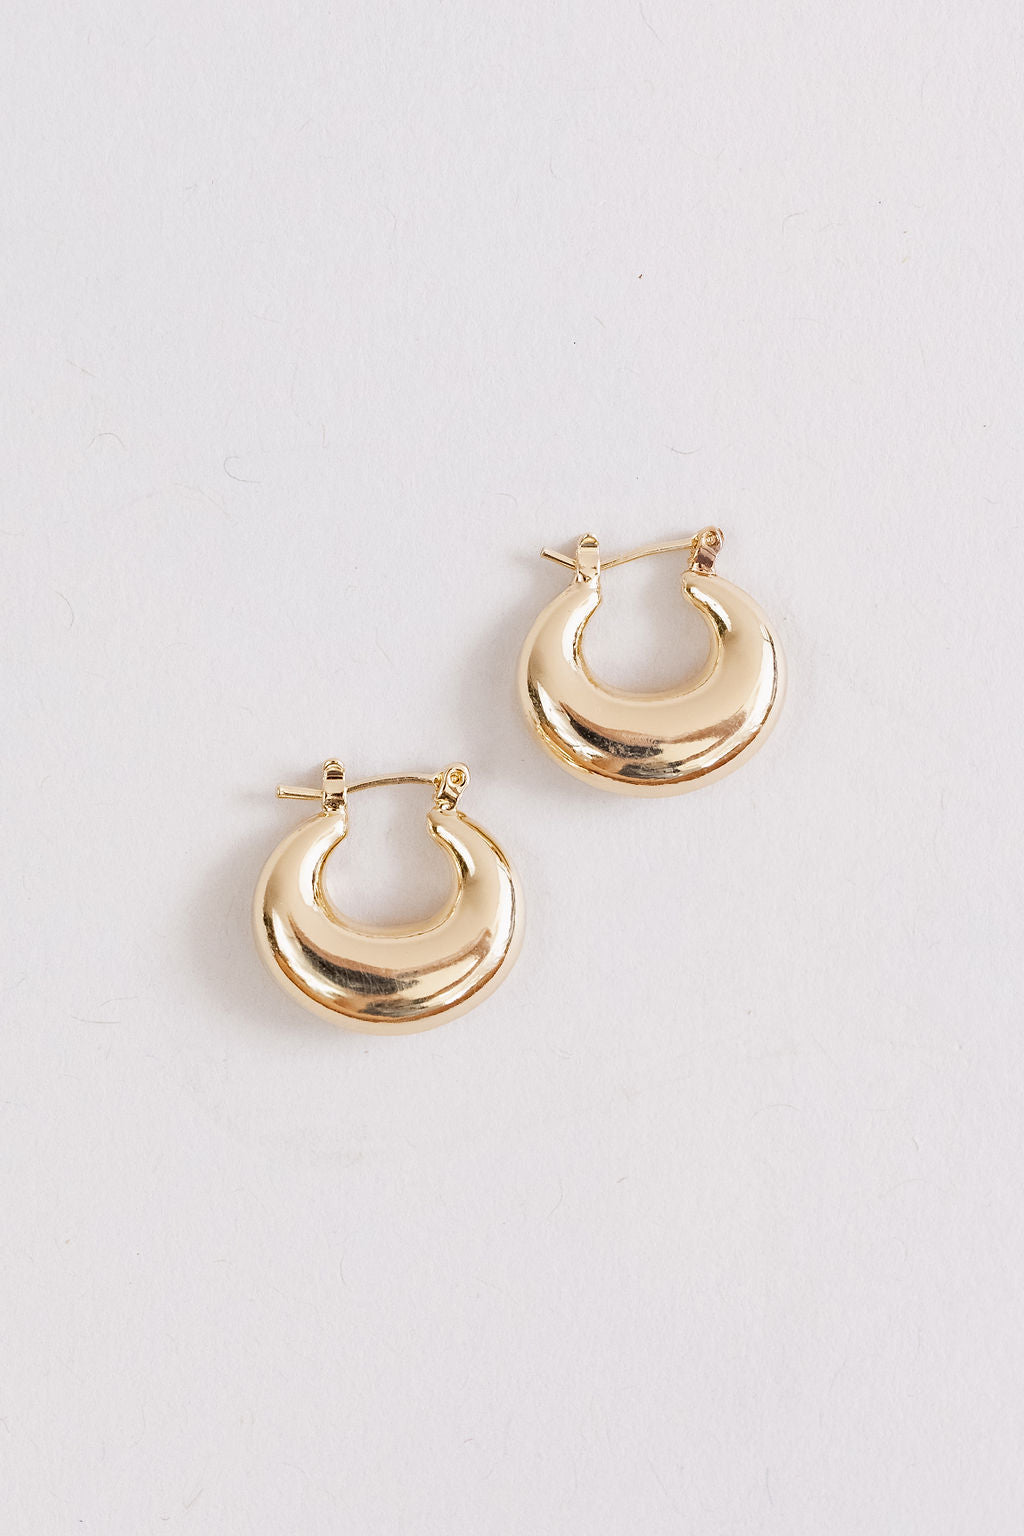 Puffy Gold Dipped Hoop Earrings | Assorted - Poppy and Stella